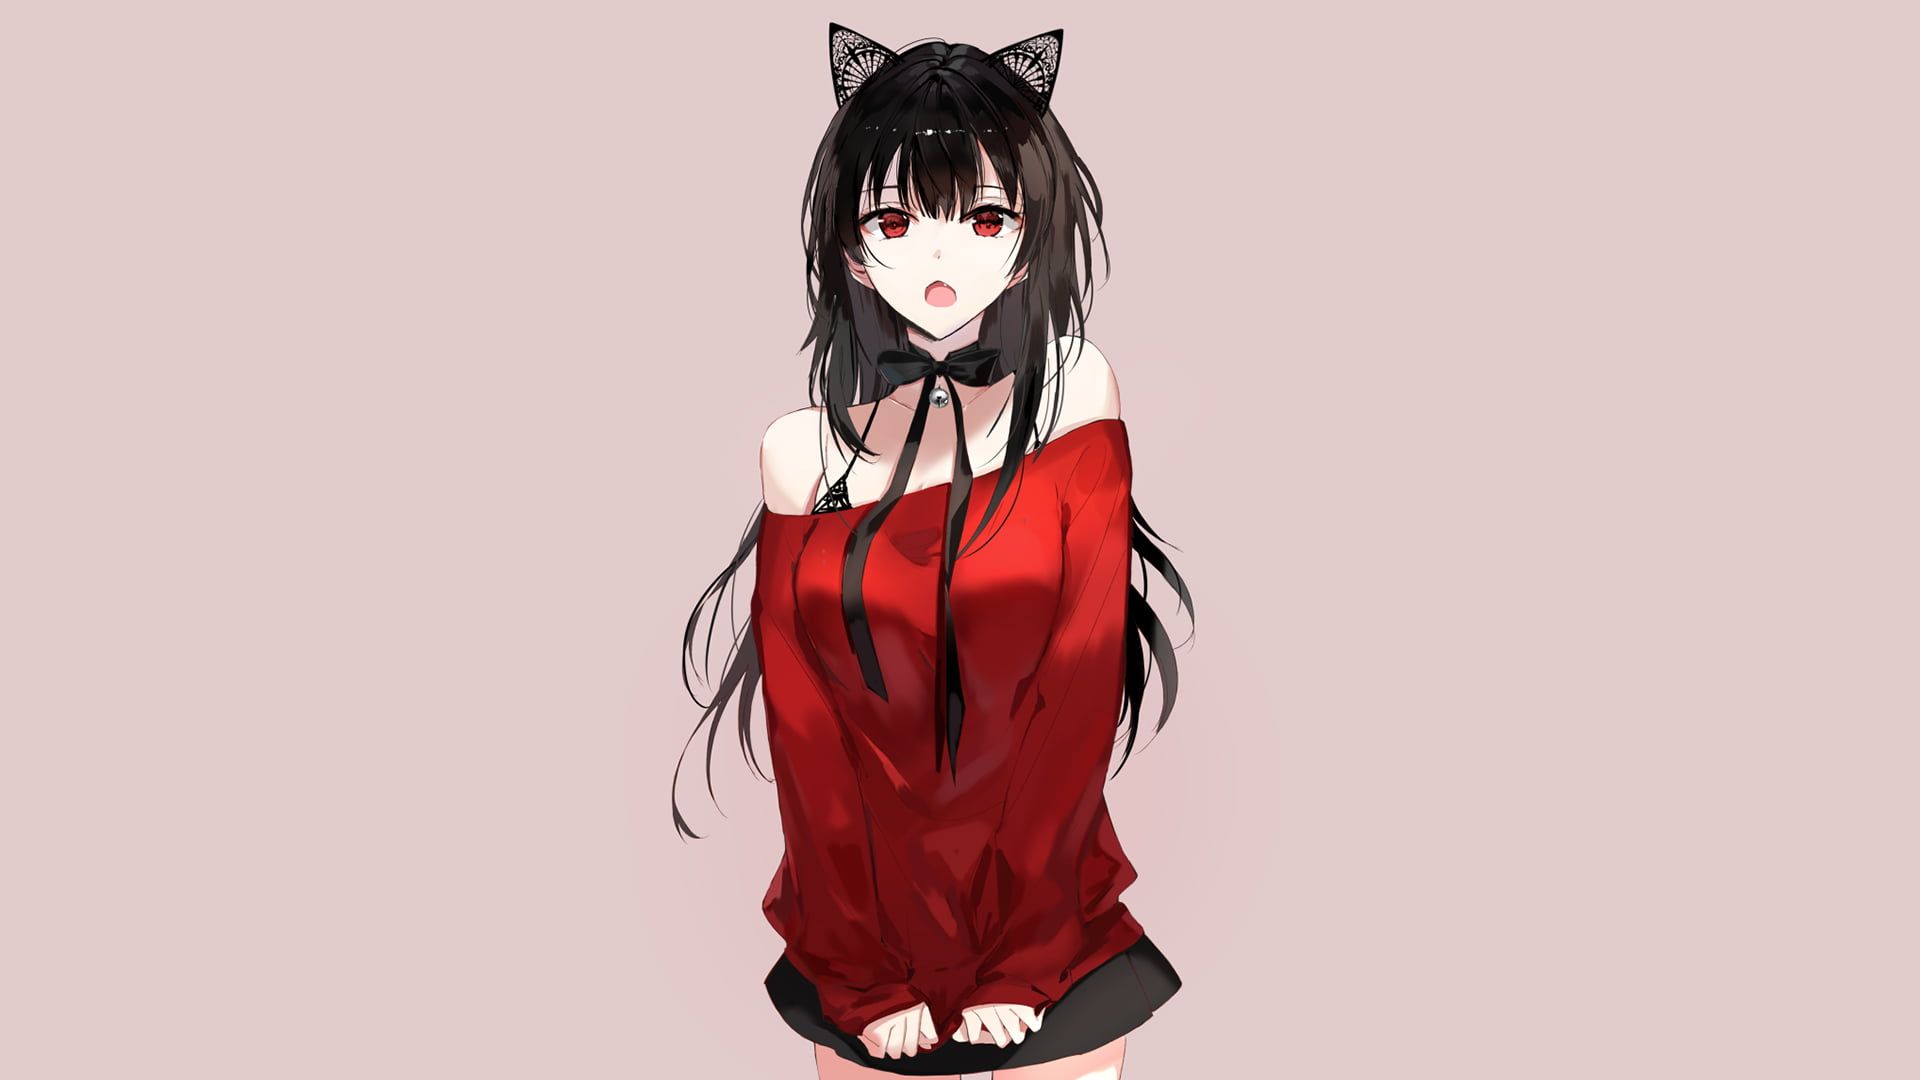 Red and Black Anime Girl Wallpaper